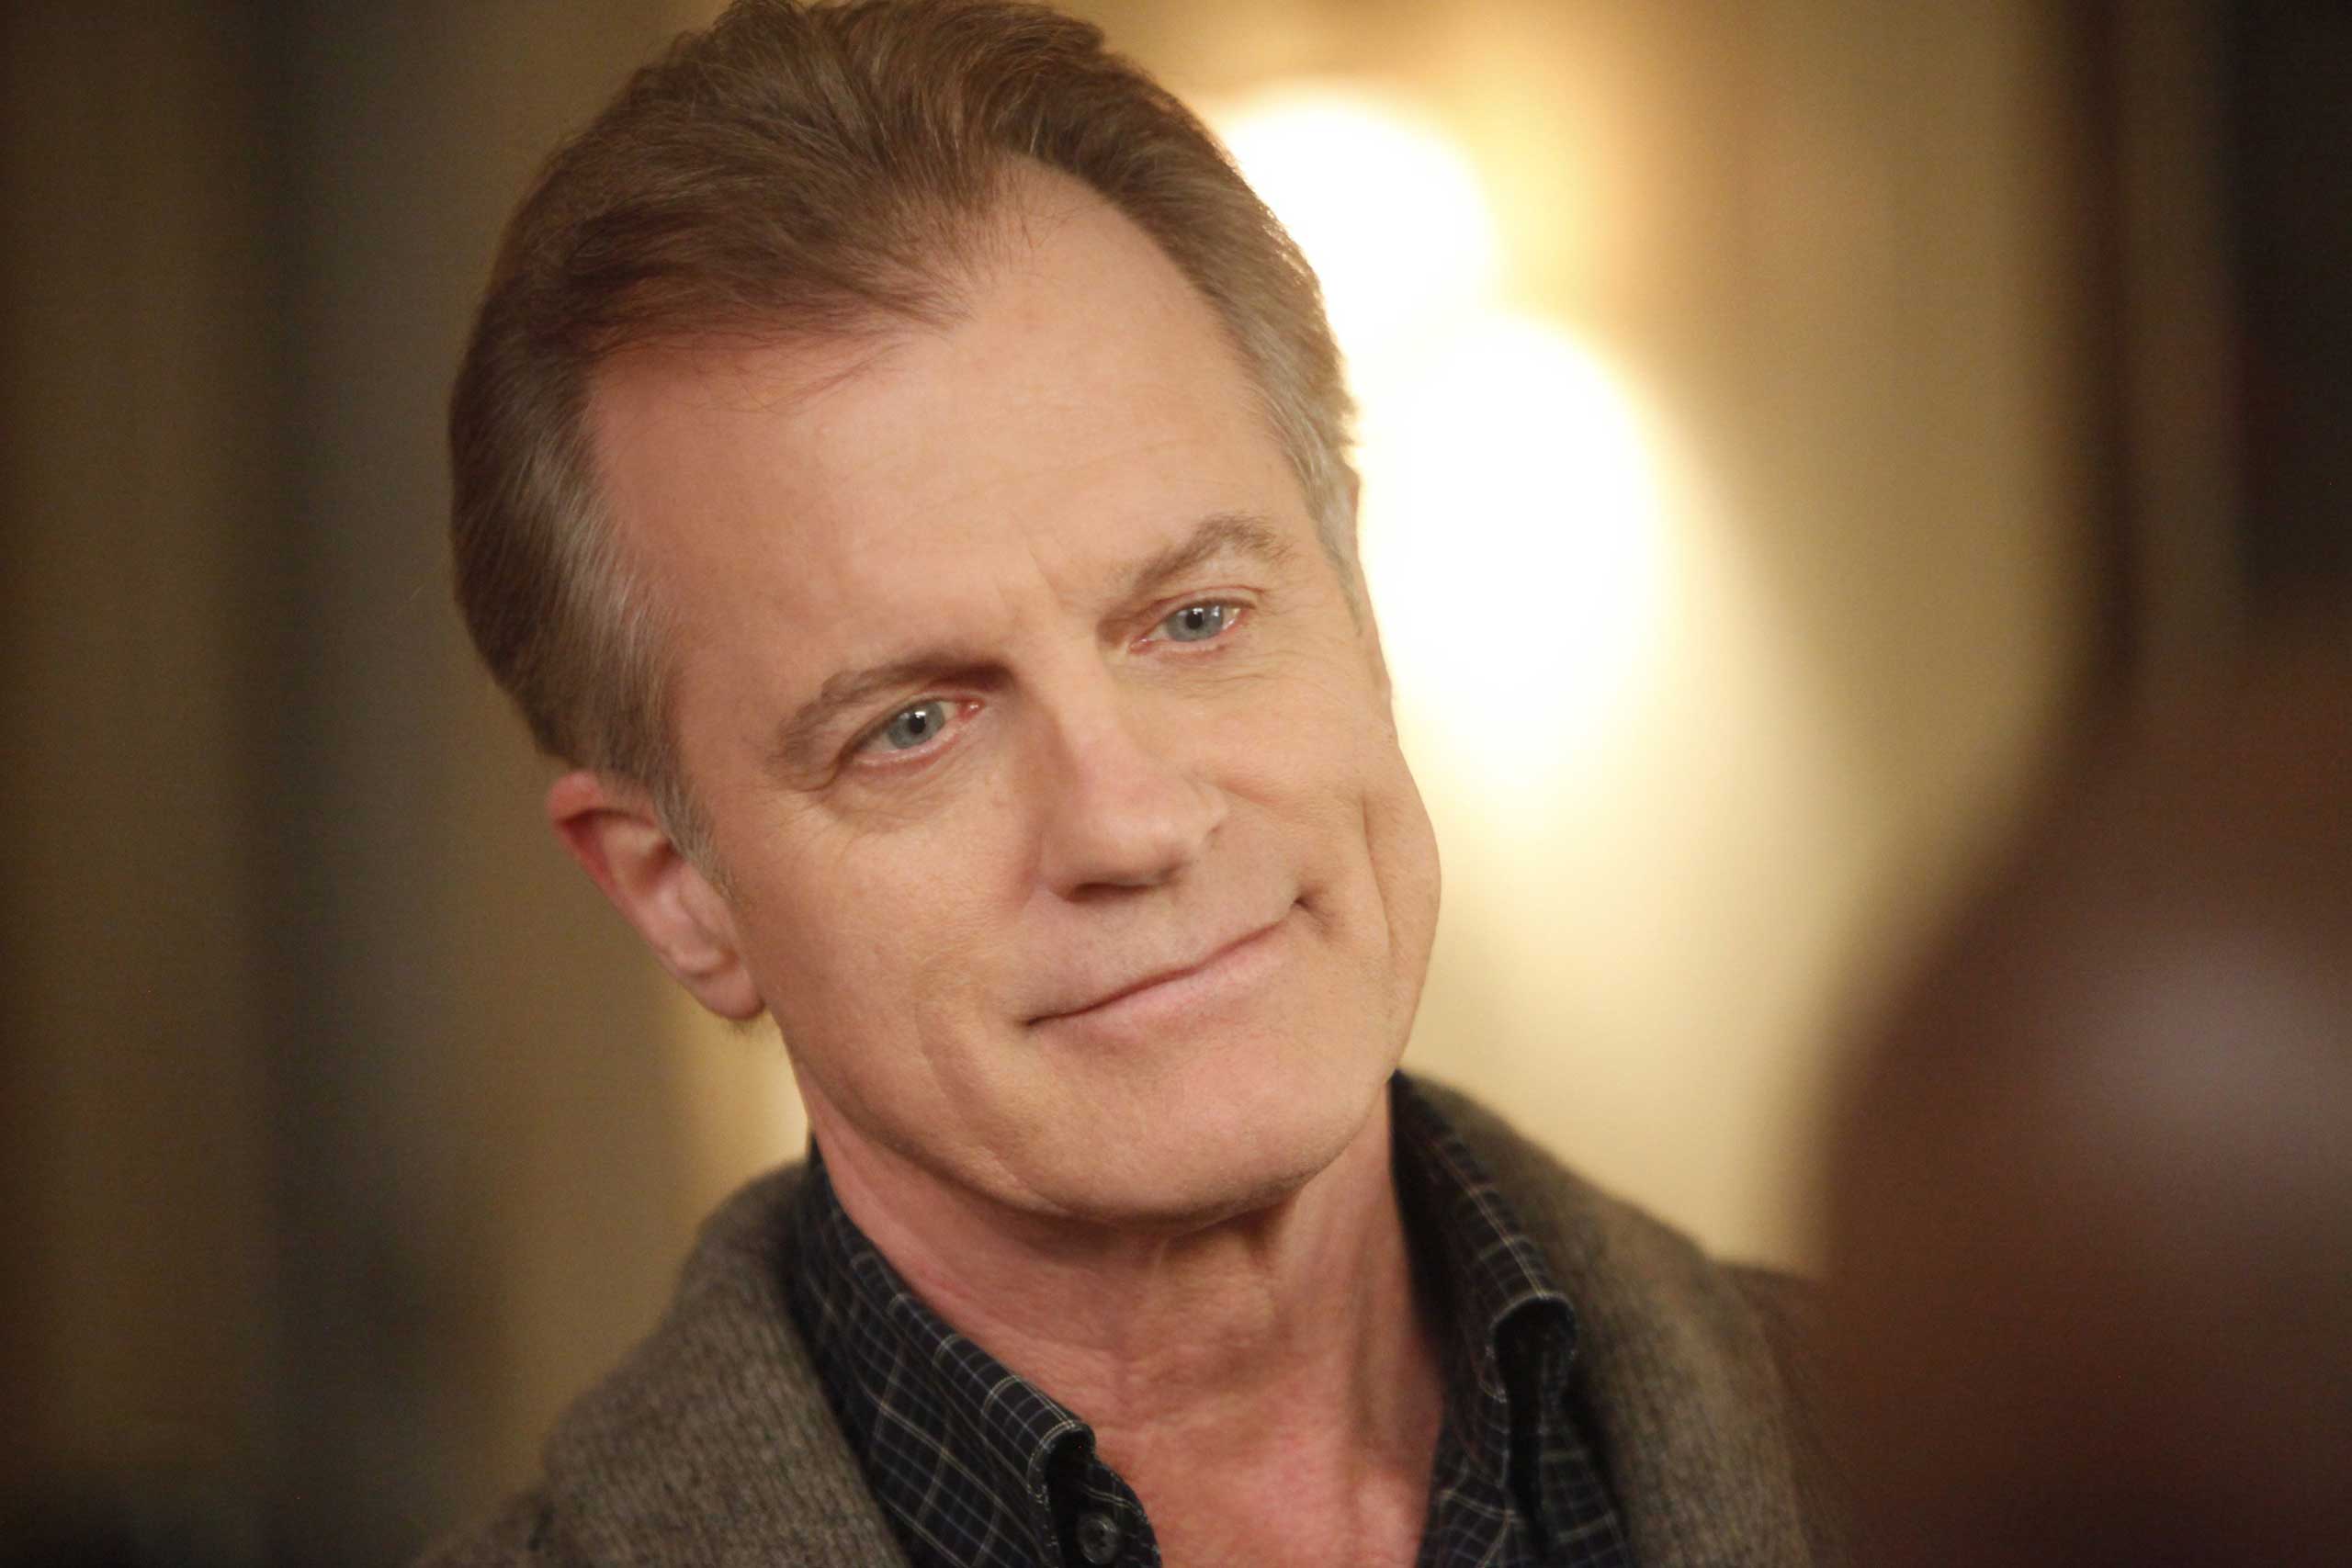 Recently released audio purports to reveal the actor Stephen Collins admitting to molesting children. (Jordin Althaus—ABC/Getty Images)